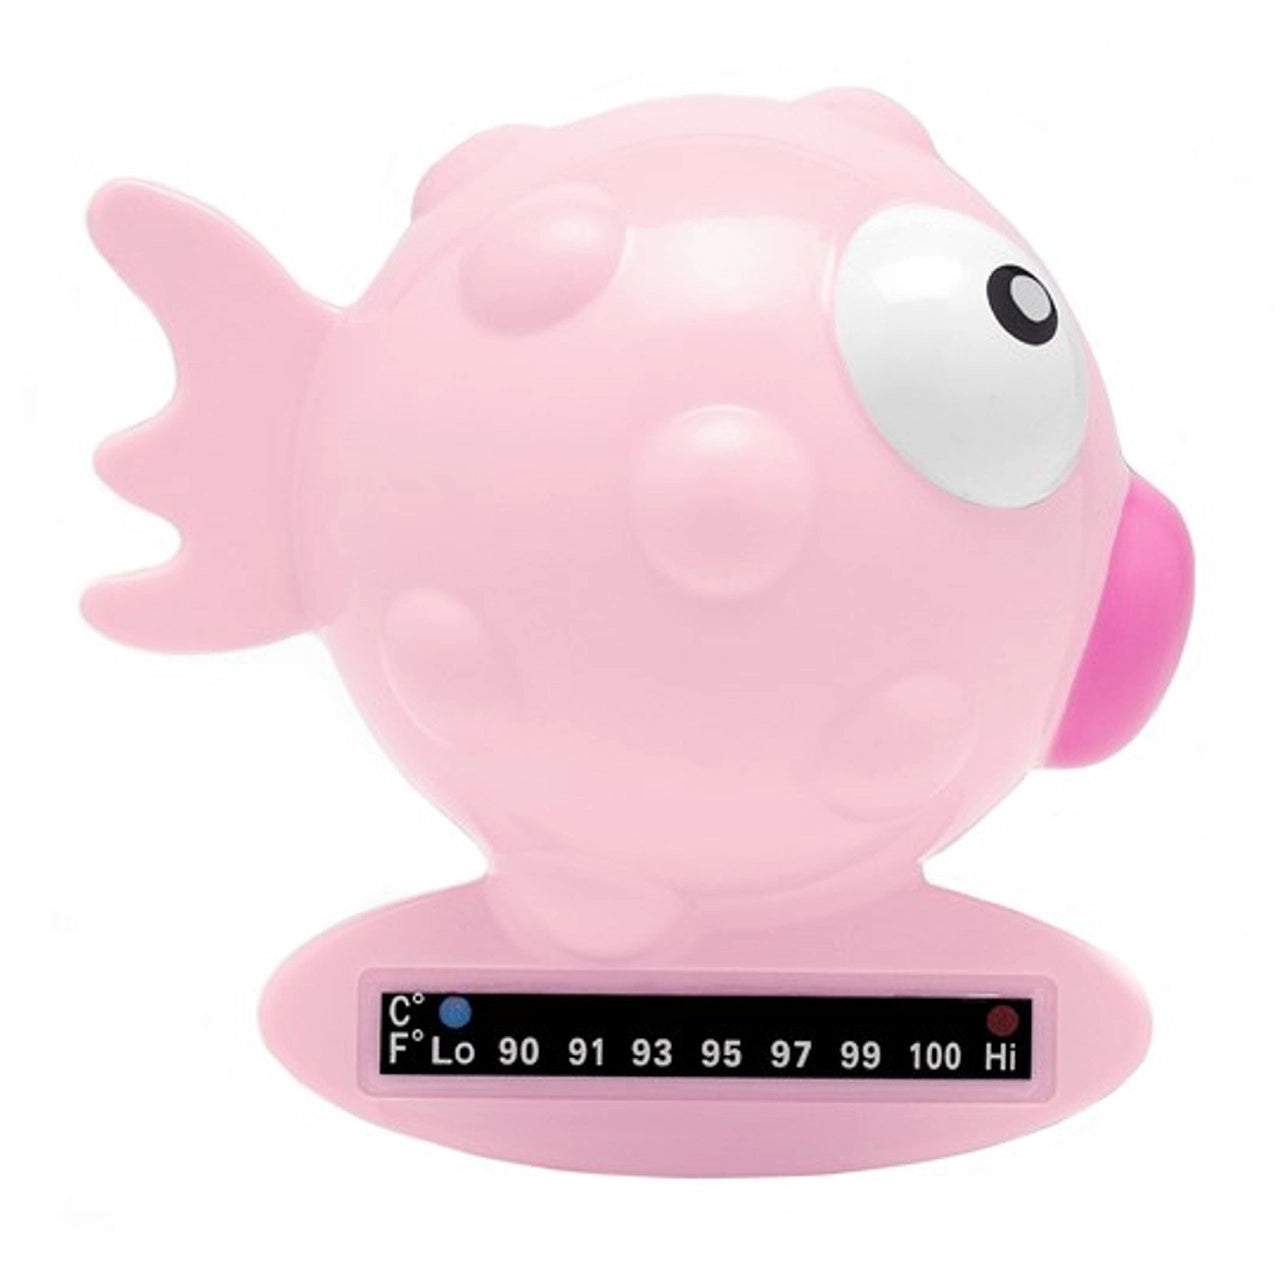 Chicco Fish Bath Thermometer Pink - Tiny Tots Baby Store 